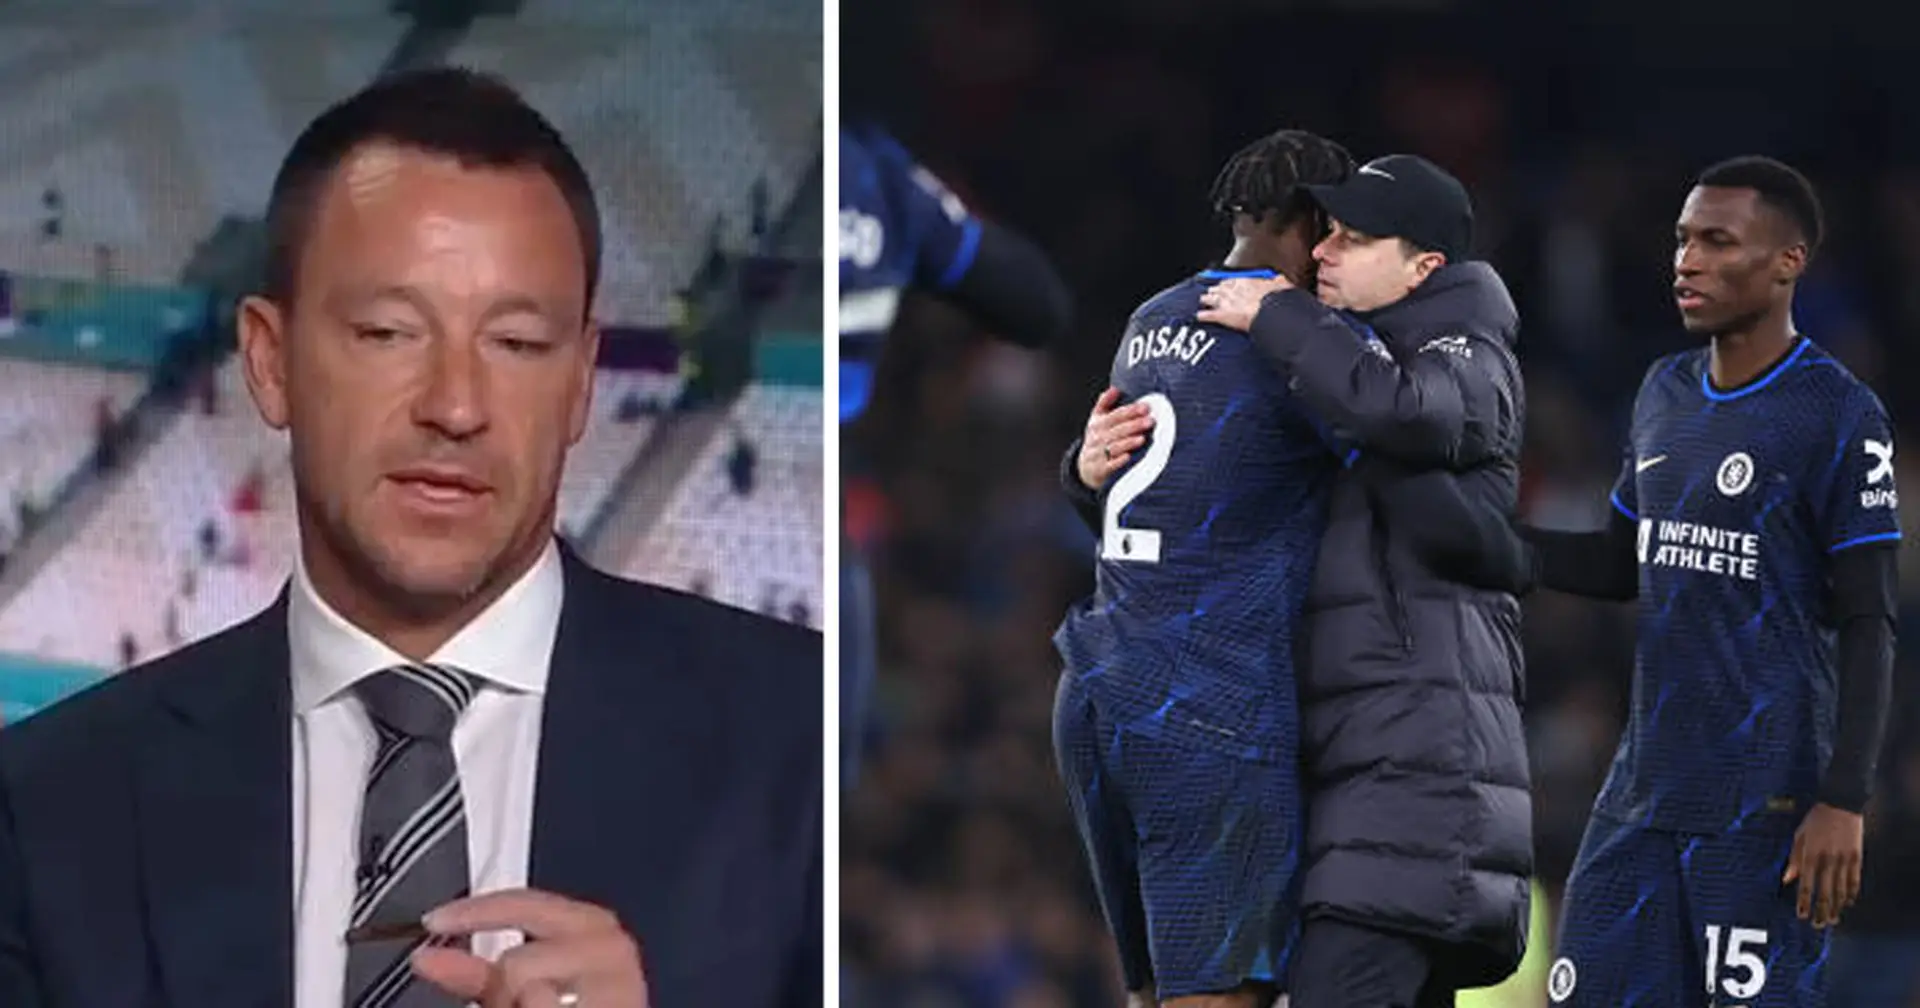 John Terry named Chelsea's two best players against Manchester City - one of them was compared to Terry himself